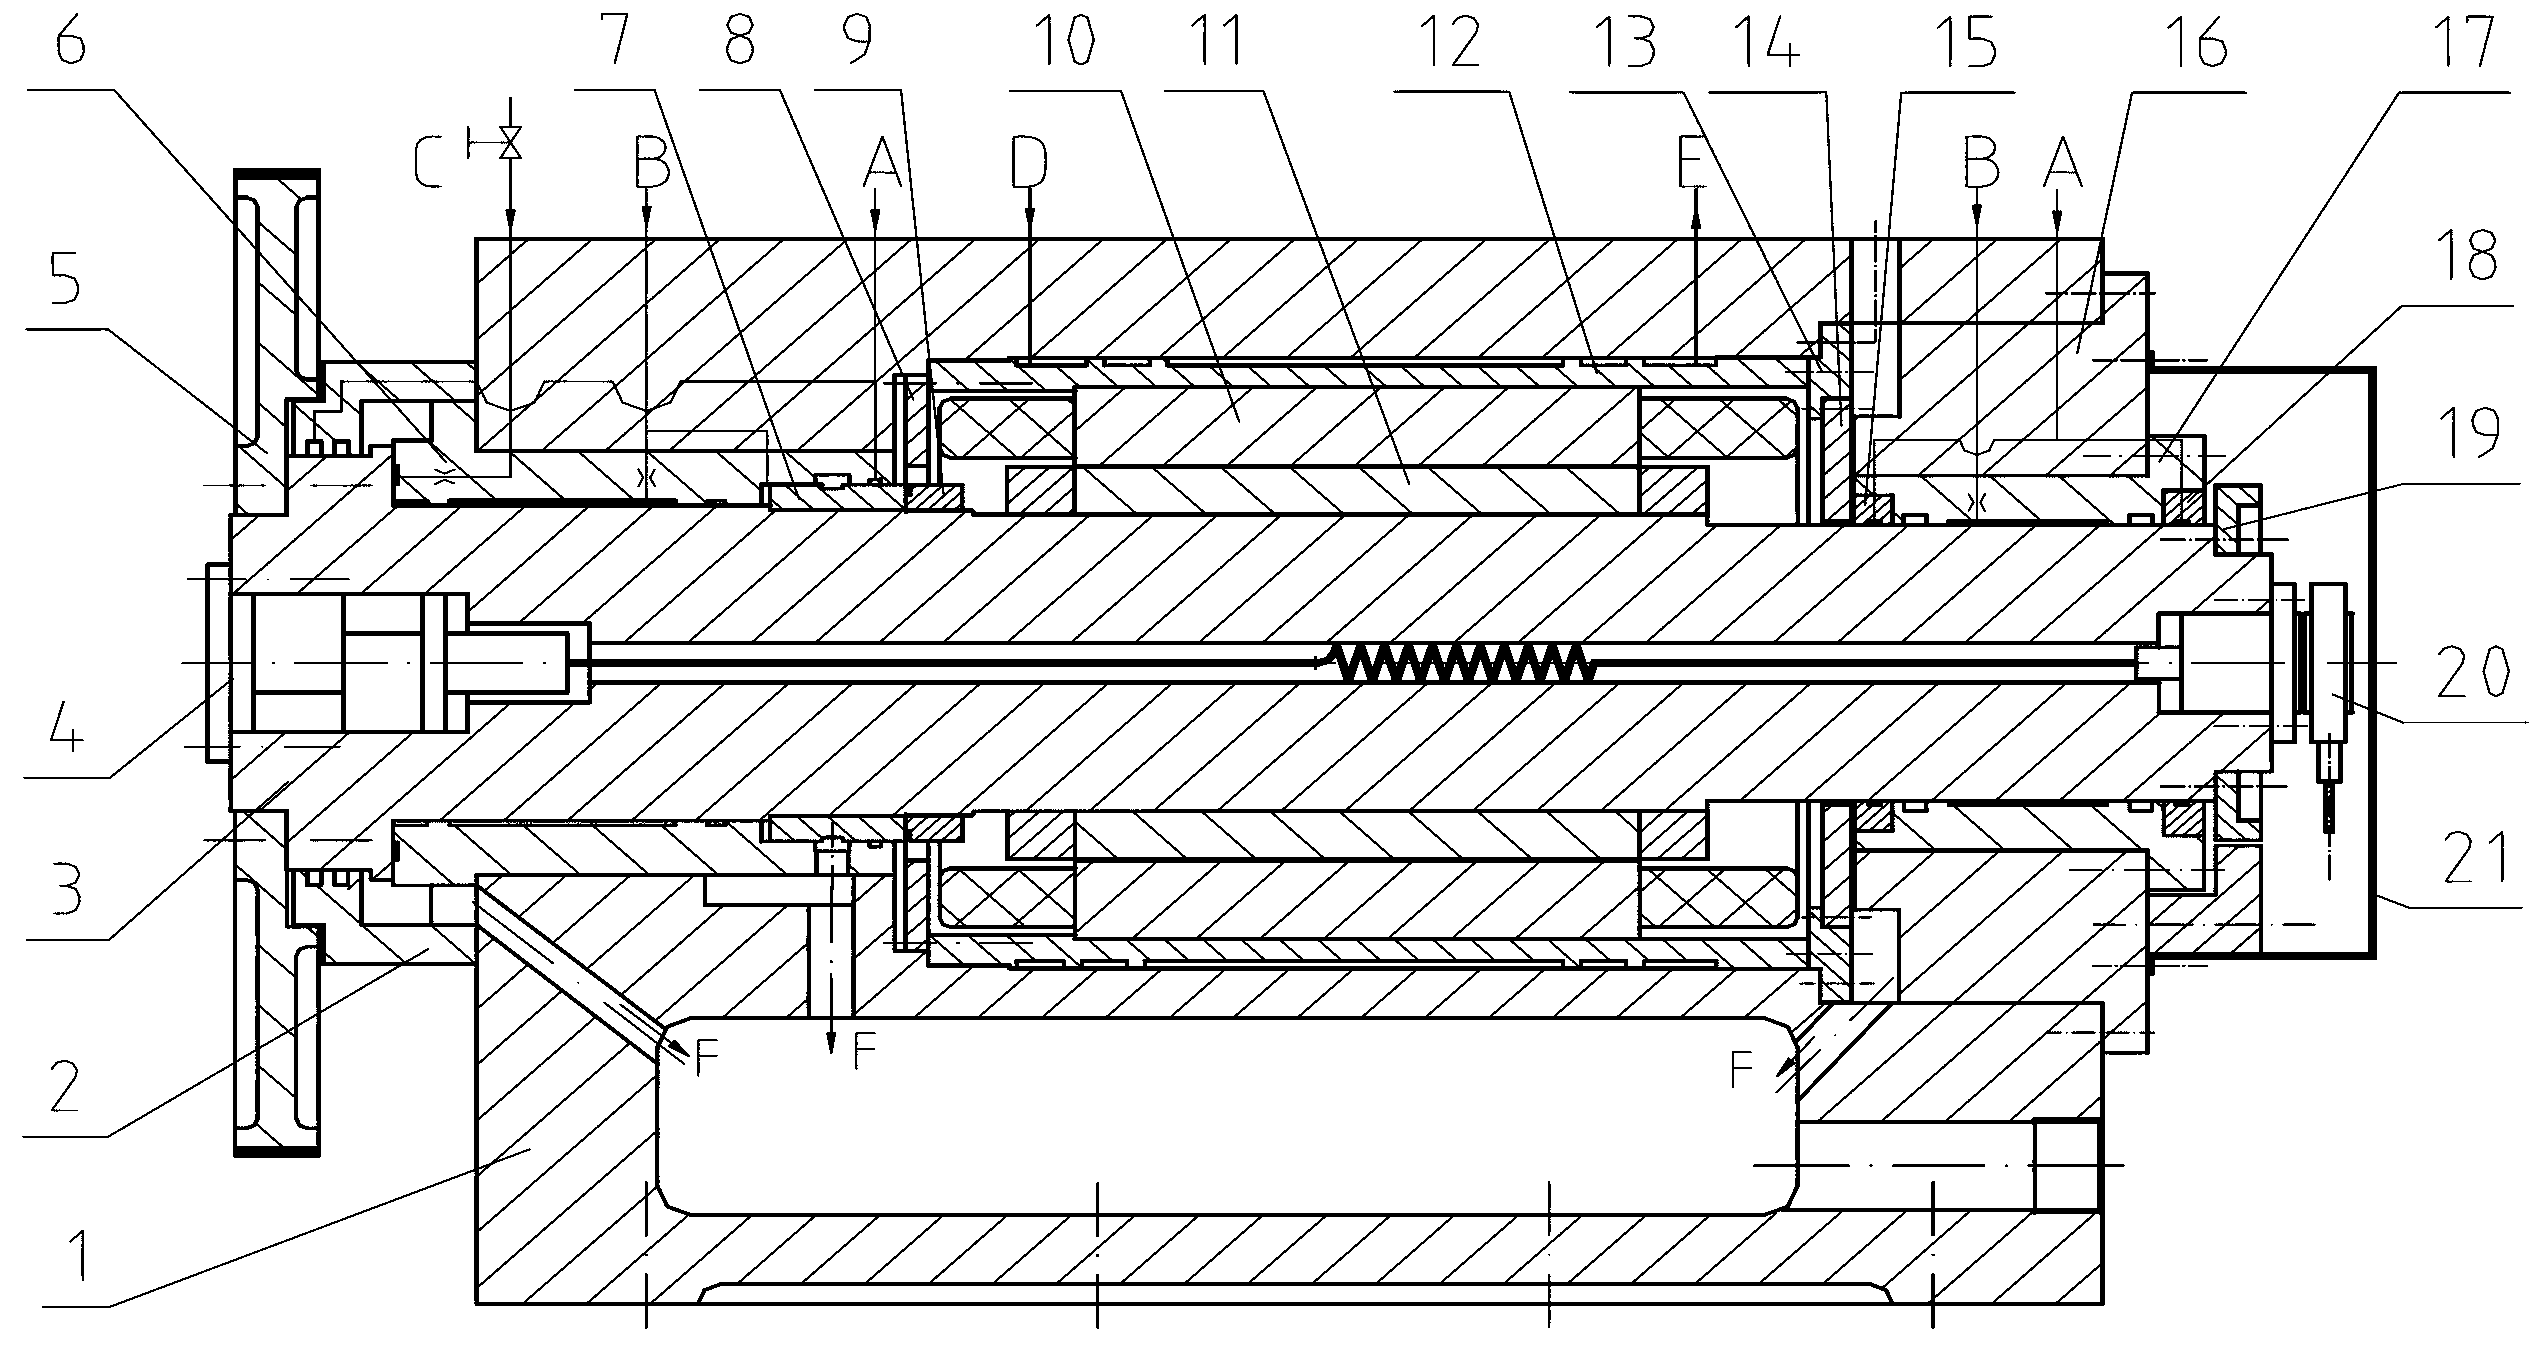 Multi-functional built-in dynamic-static-pressure motorized spindle for efficient high-speed precision machine